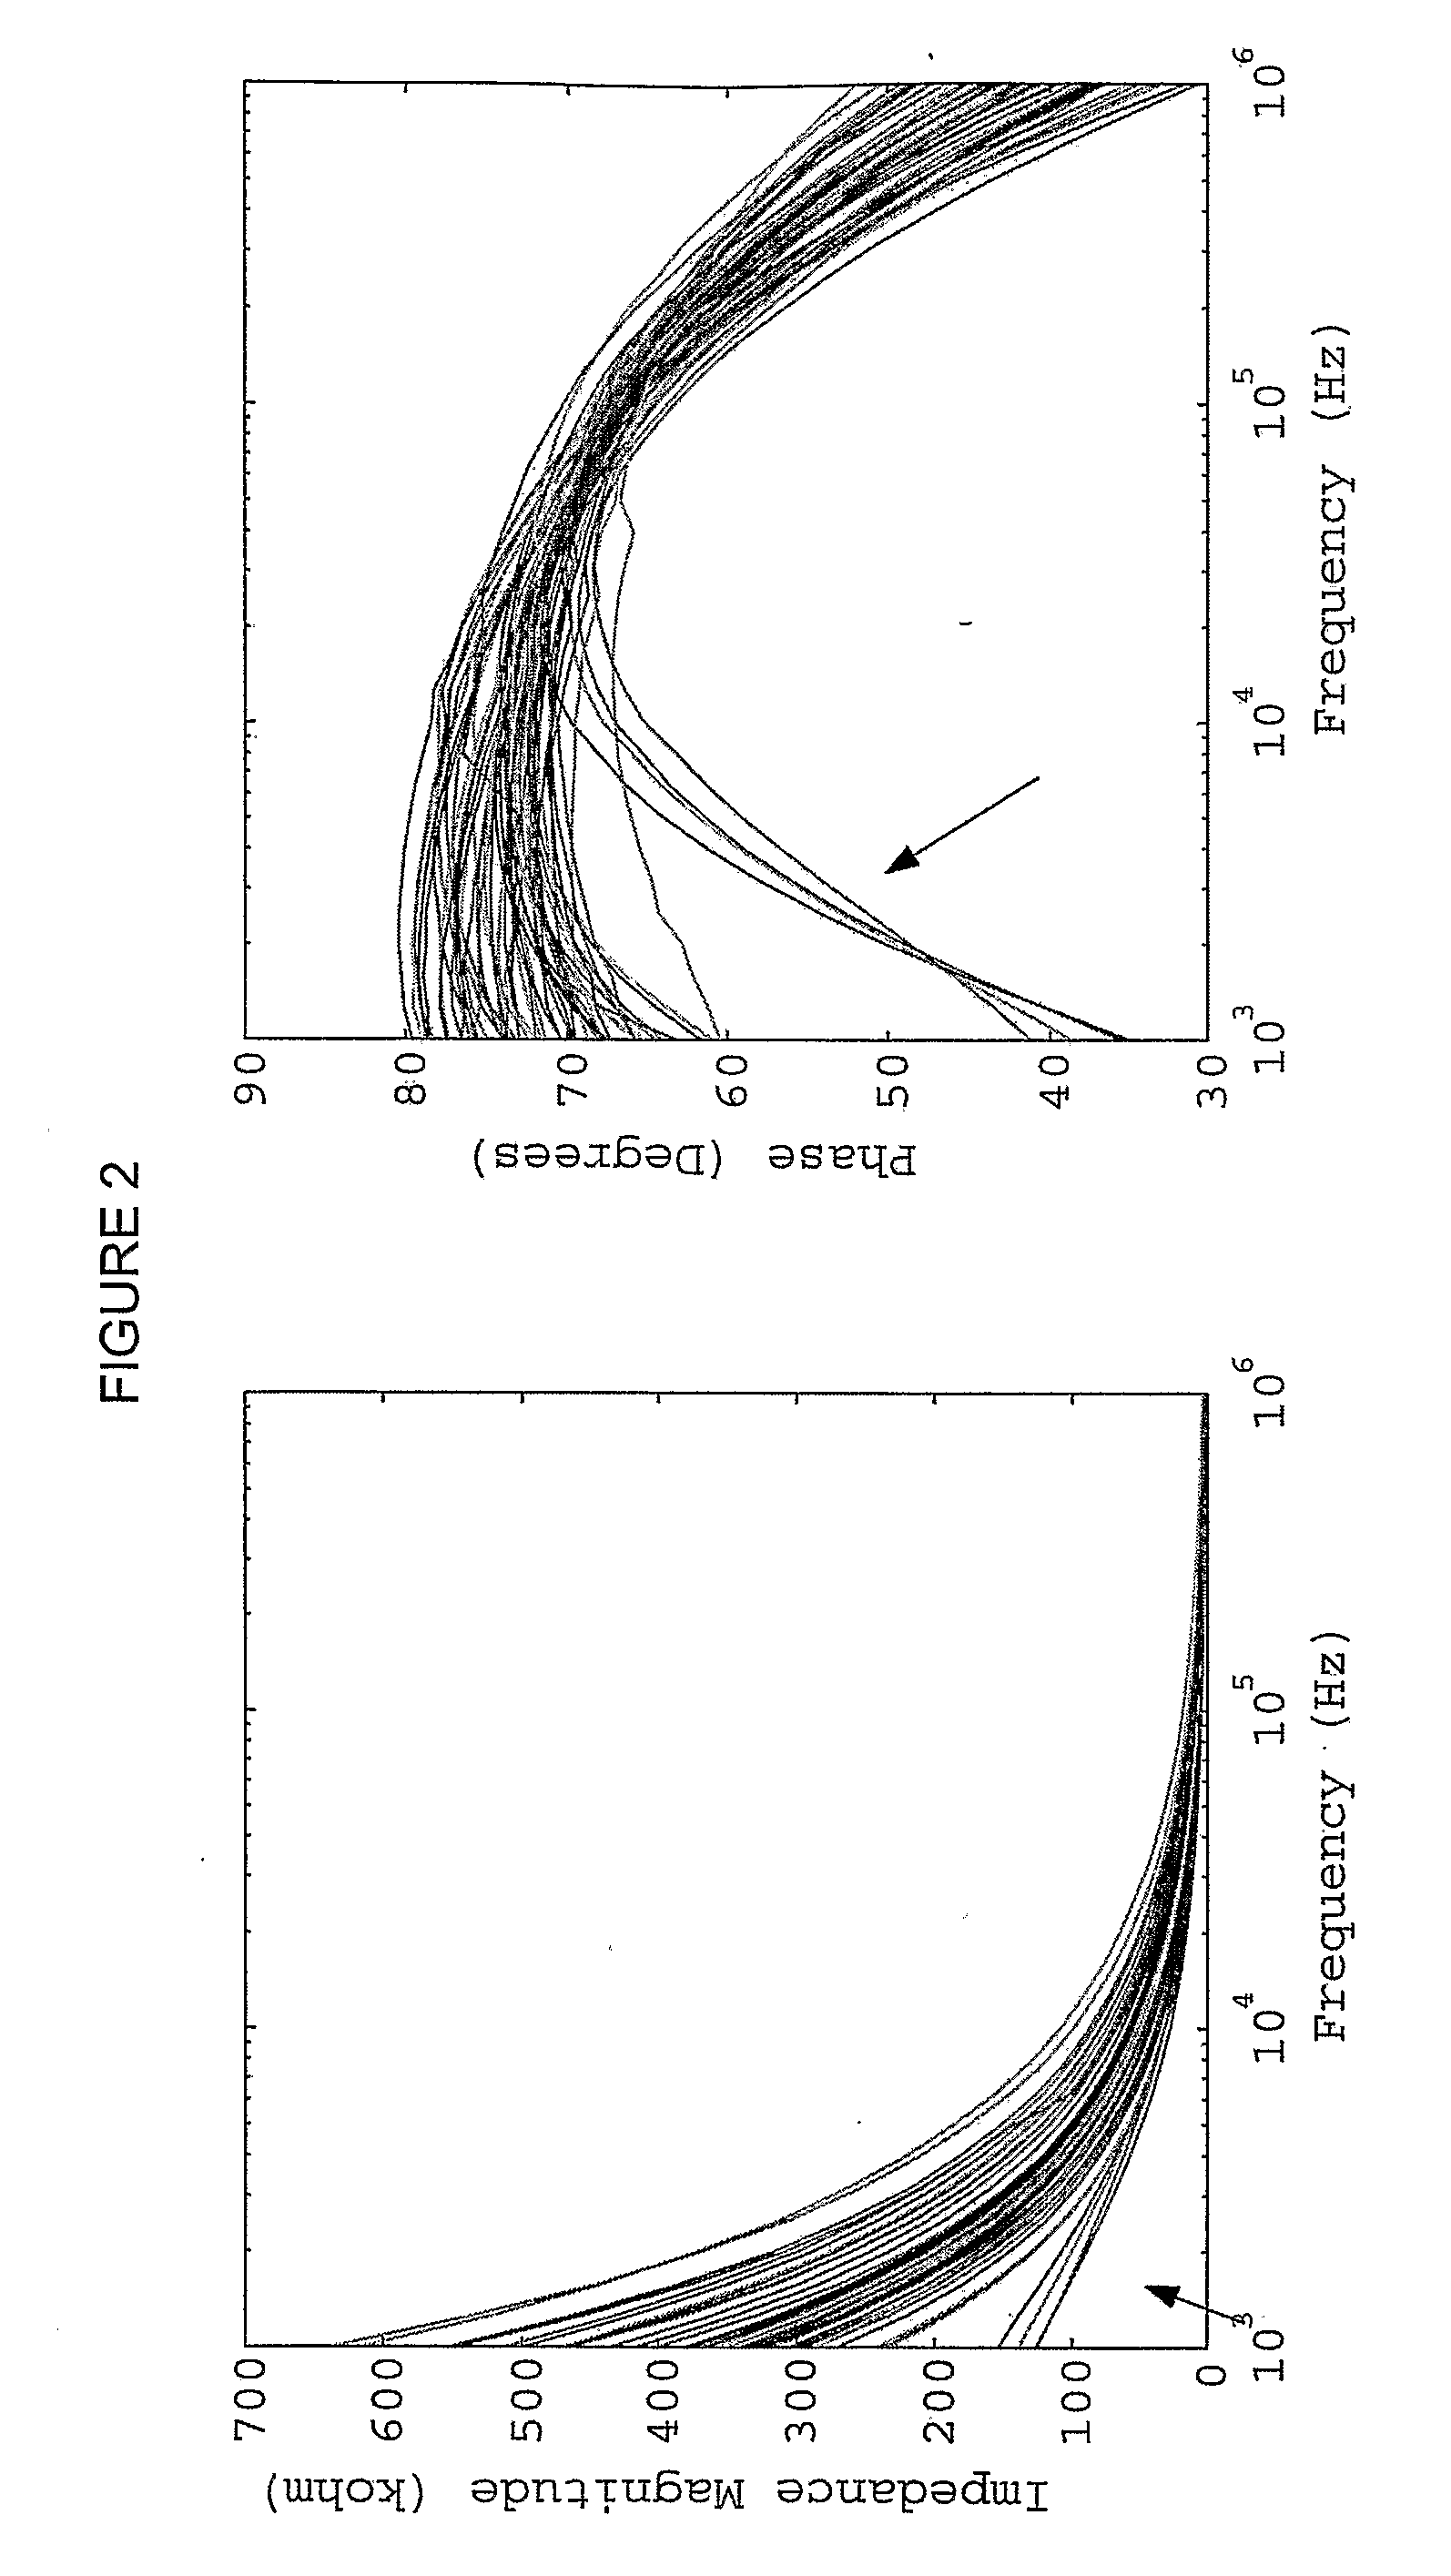 Method and apparatus for measuring glucose in body fluids using sub-dermal body tissue impedance measurements